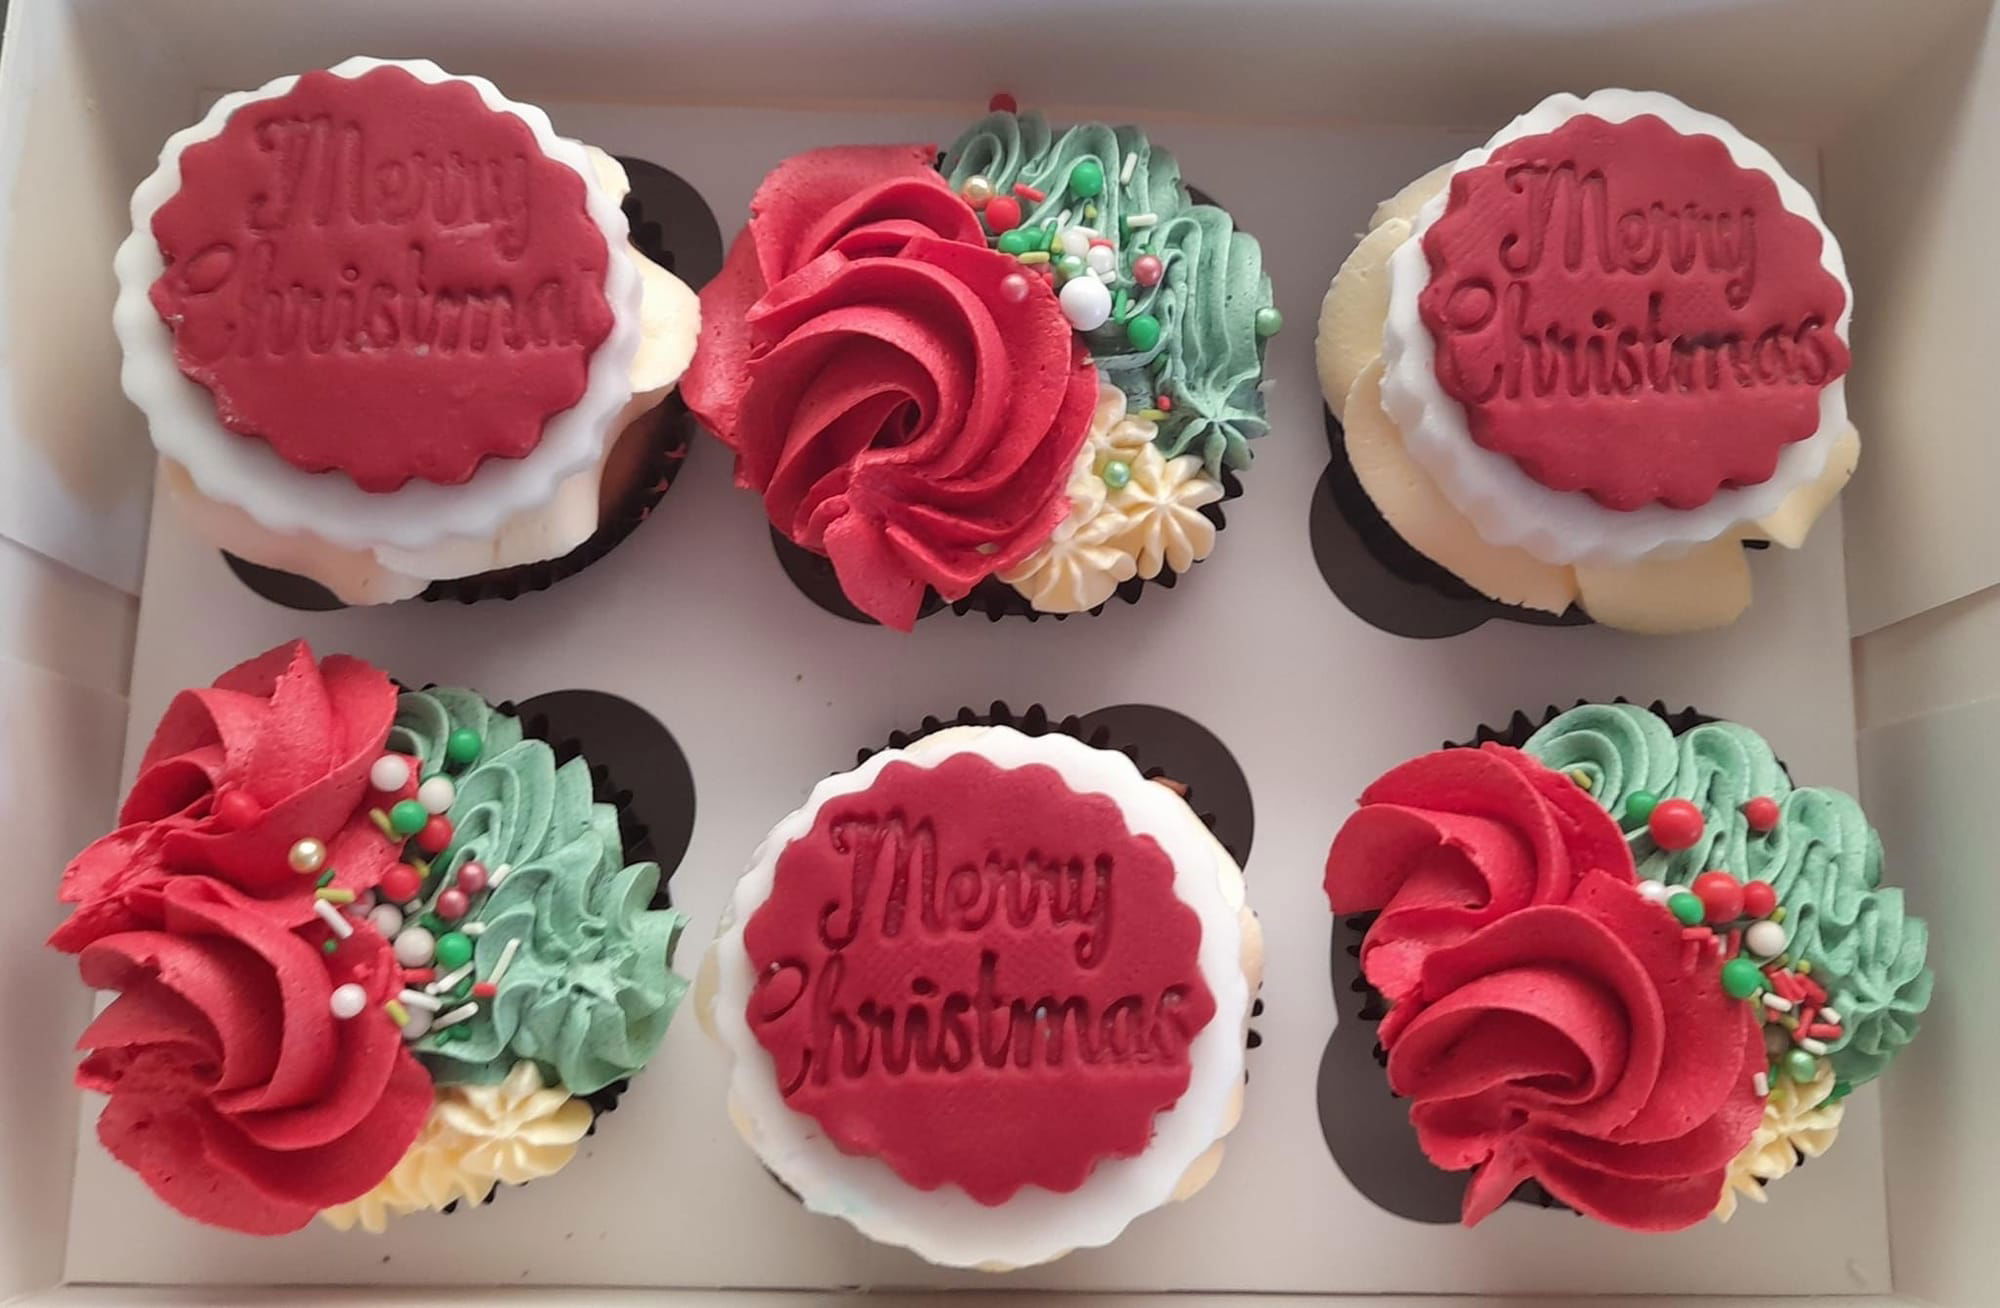 Vanilla and Chocolate Christmas Cupcakes With Buttercream Frosting